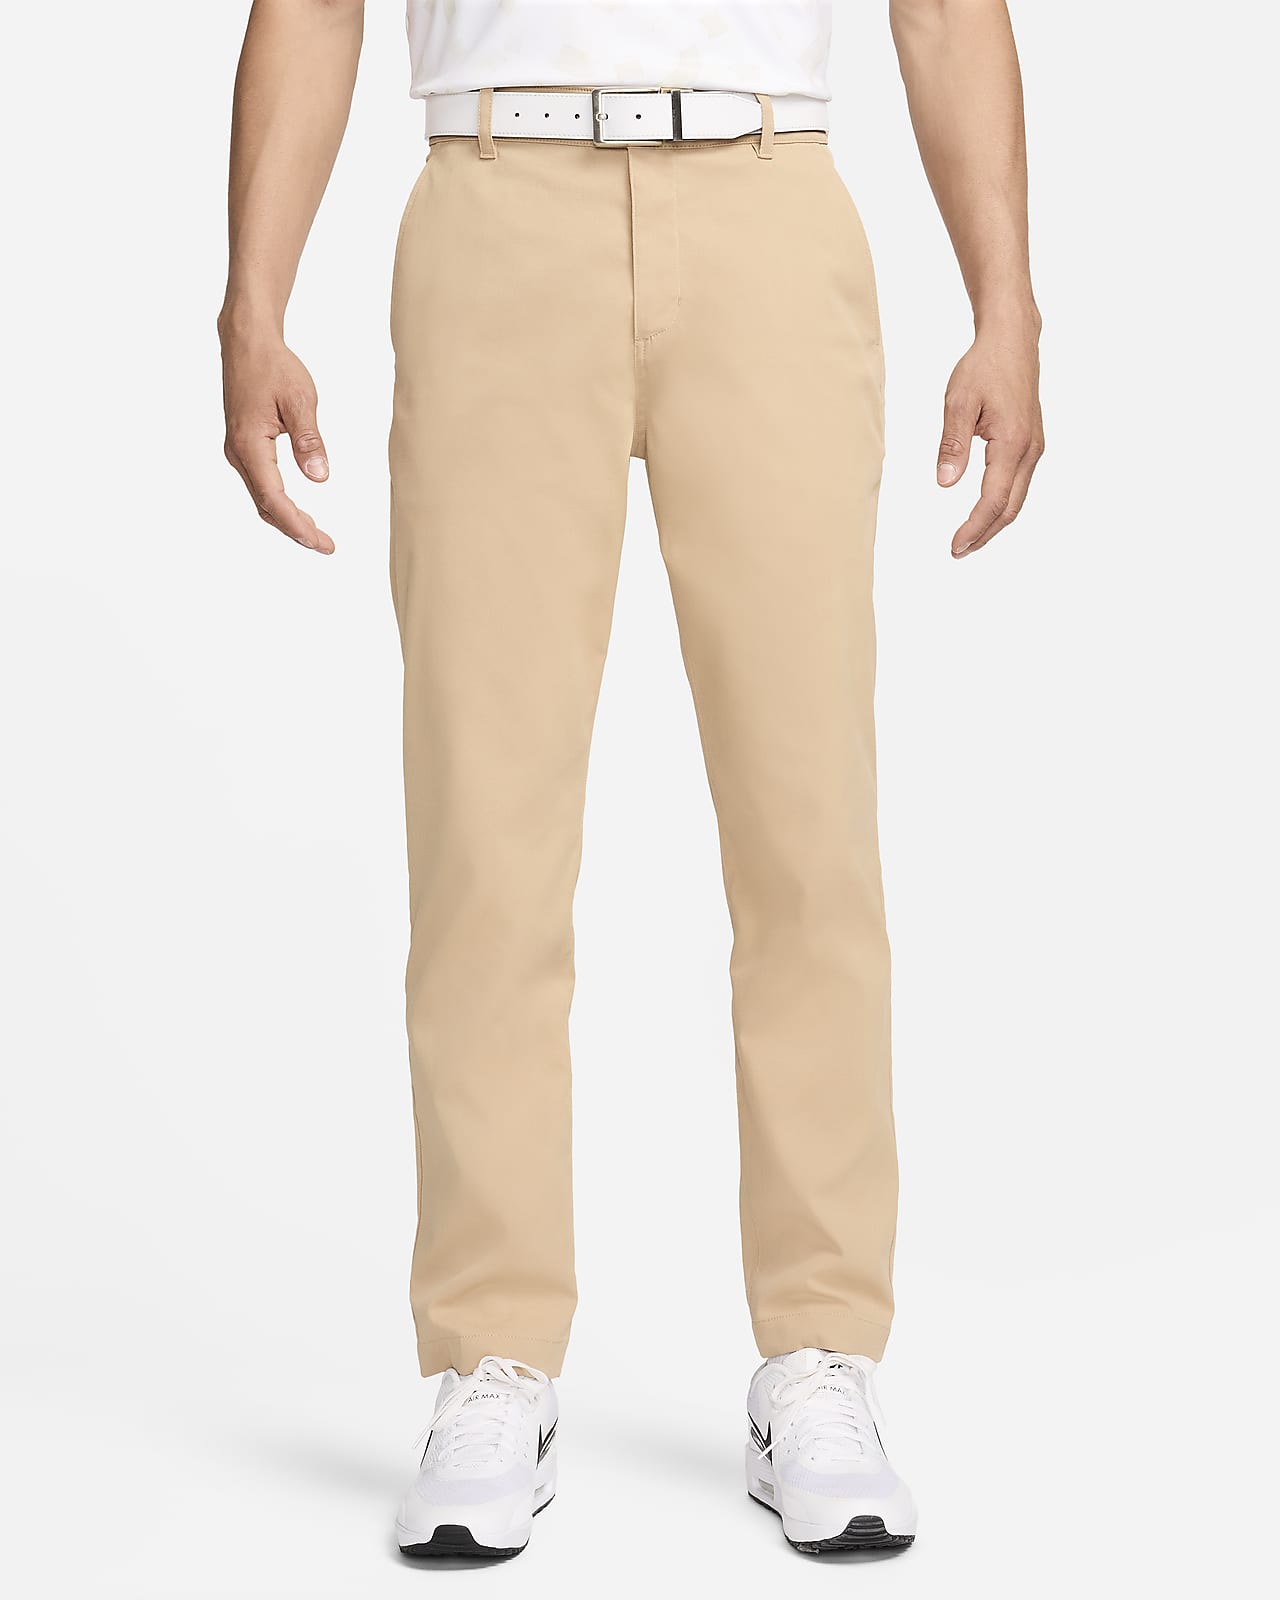 Traveler Collection Slim Fit Chino Golf Pant - Memorial Day Deals